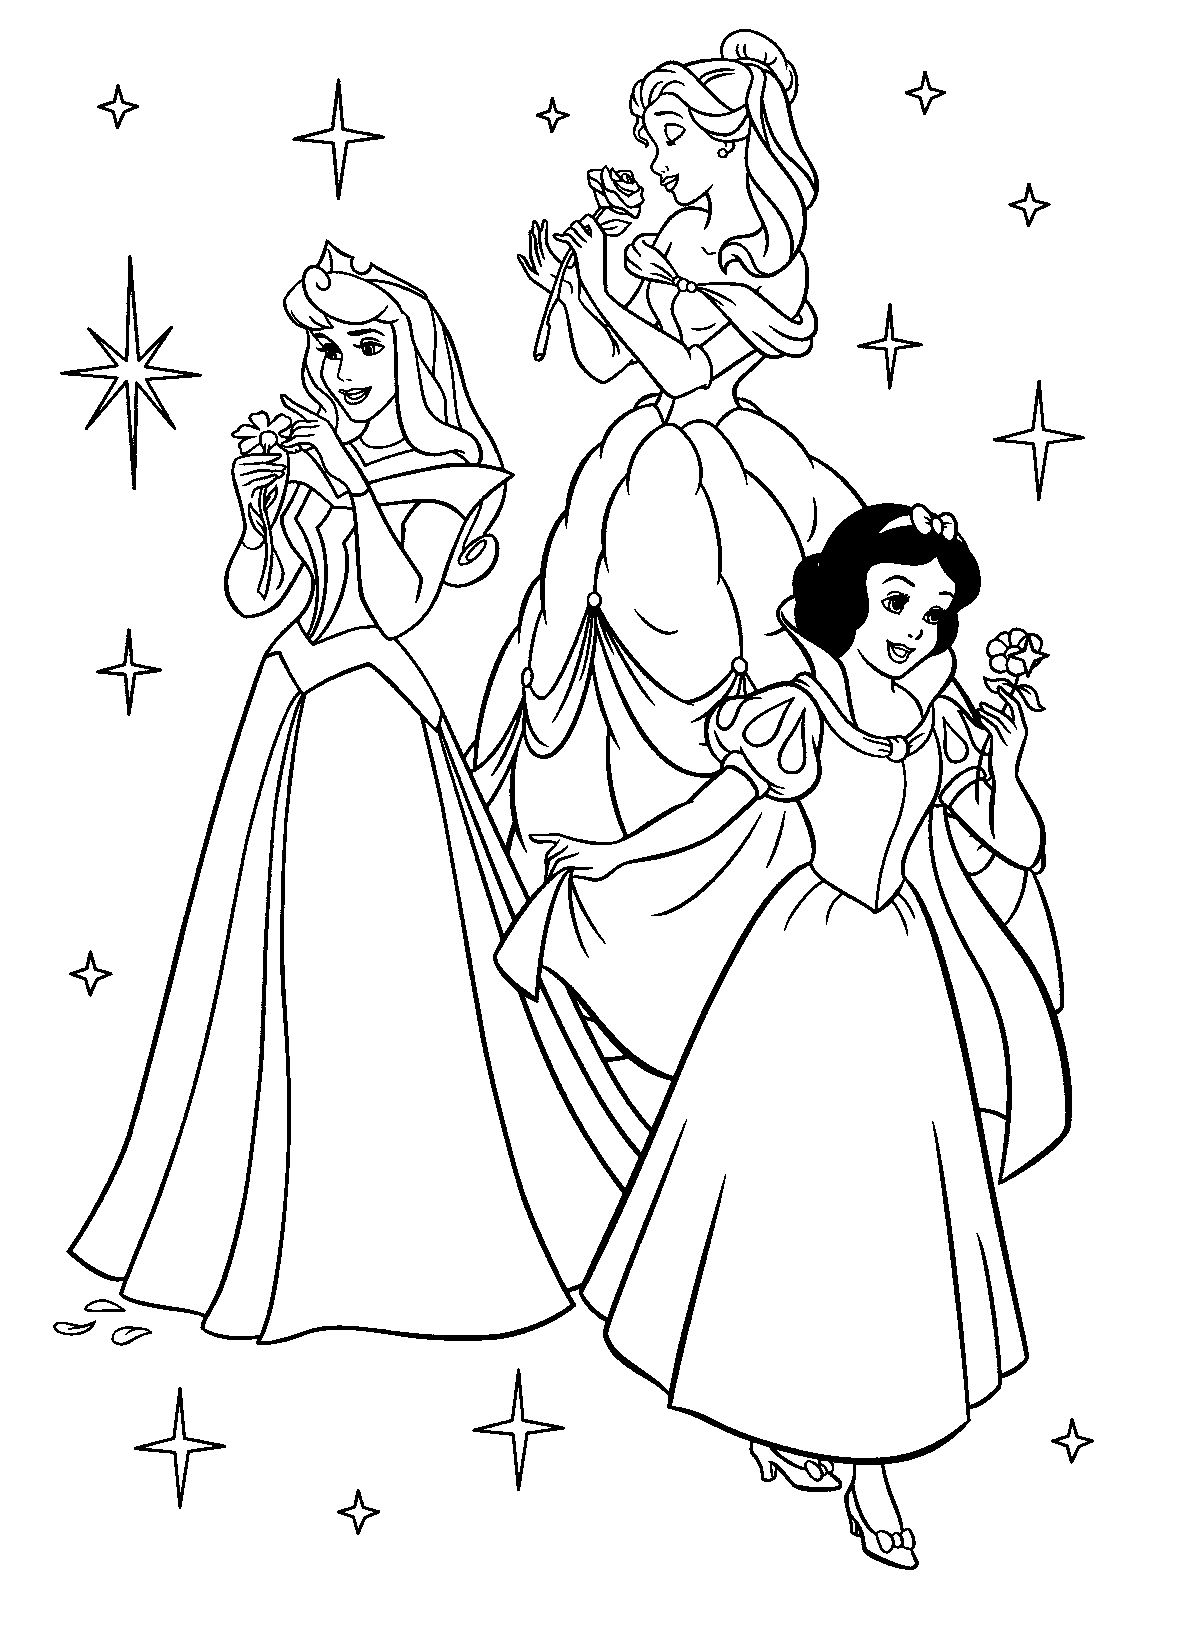 Coloring pages free printable disney princess coloring pages for kids